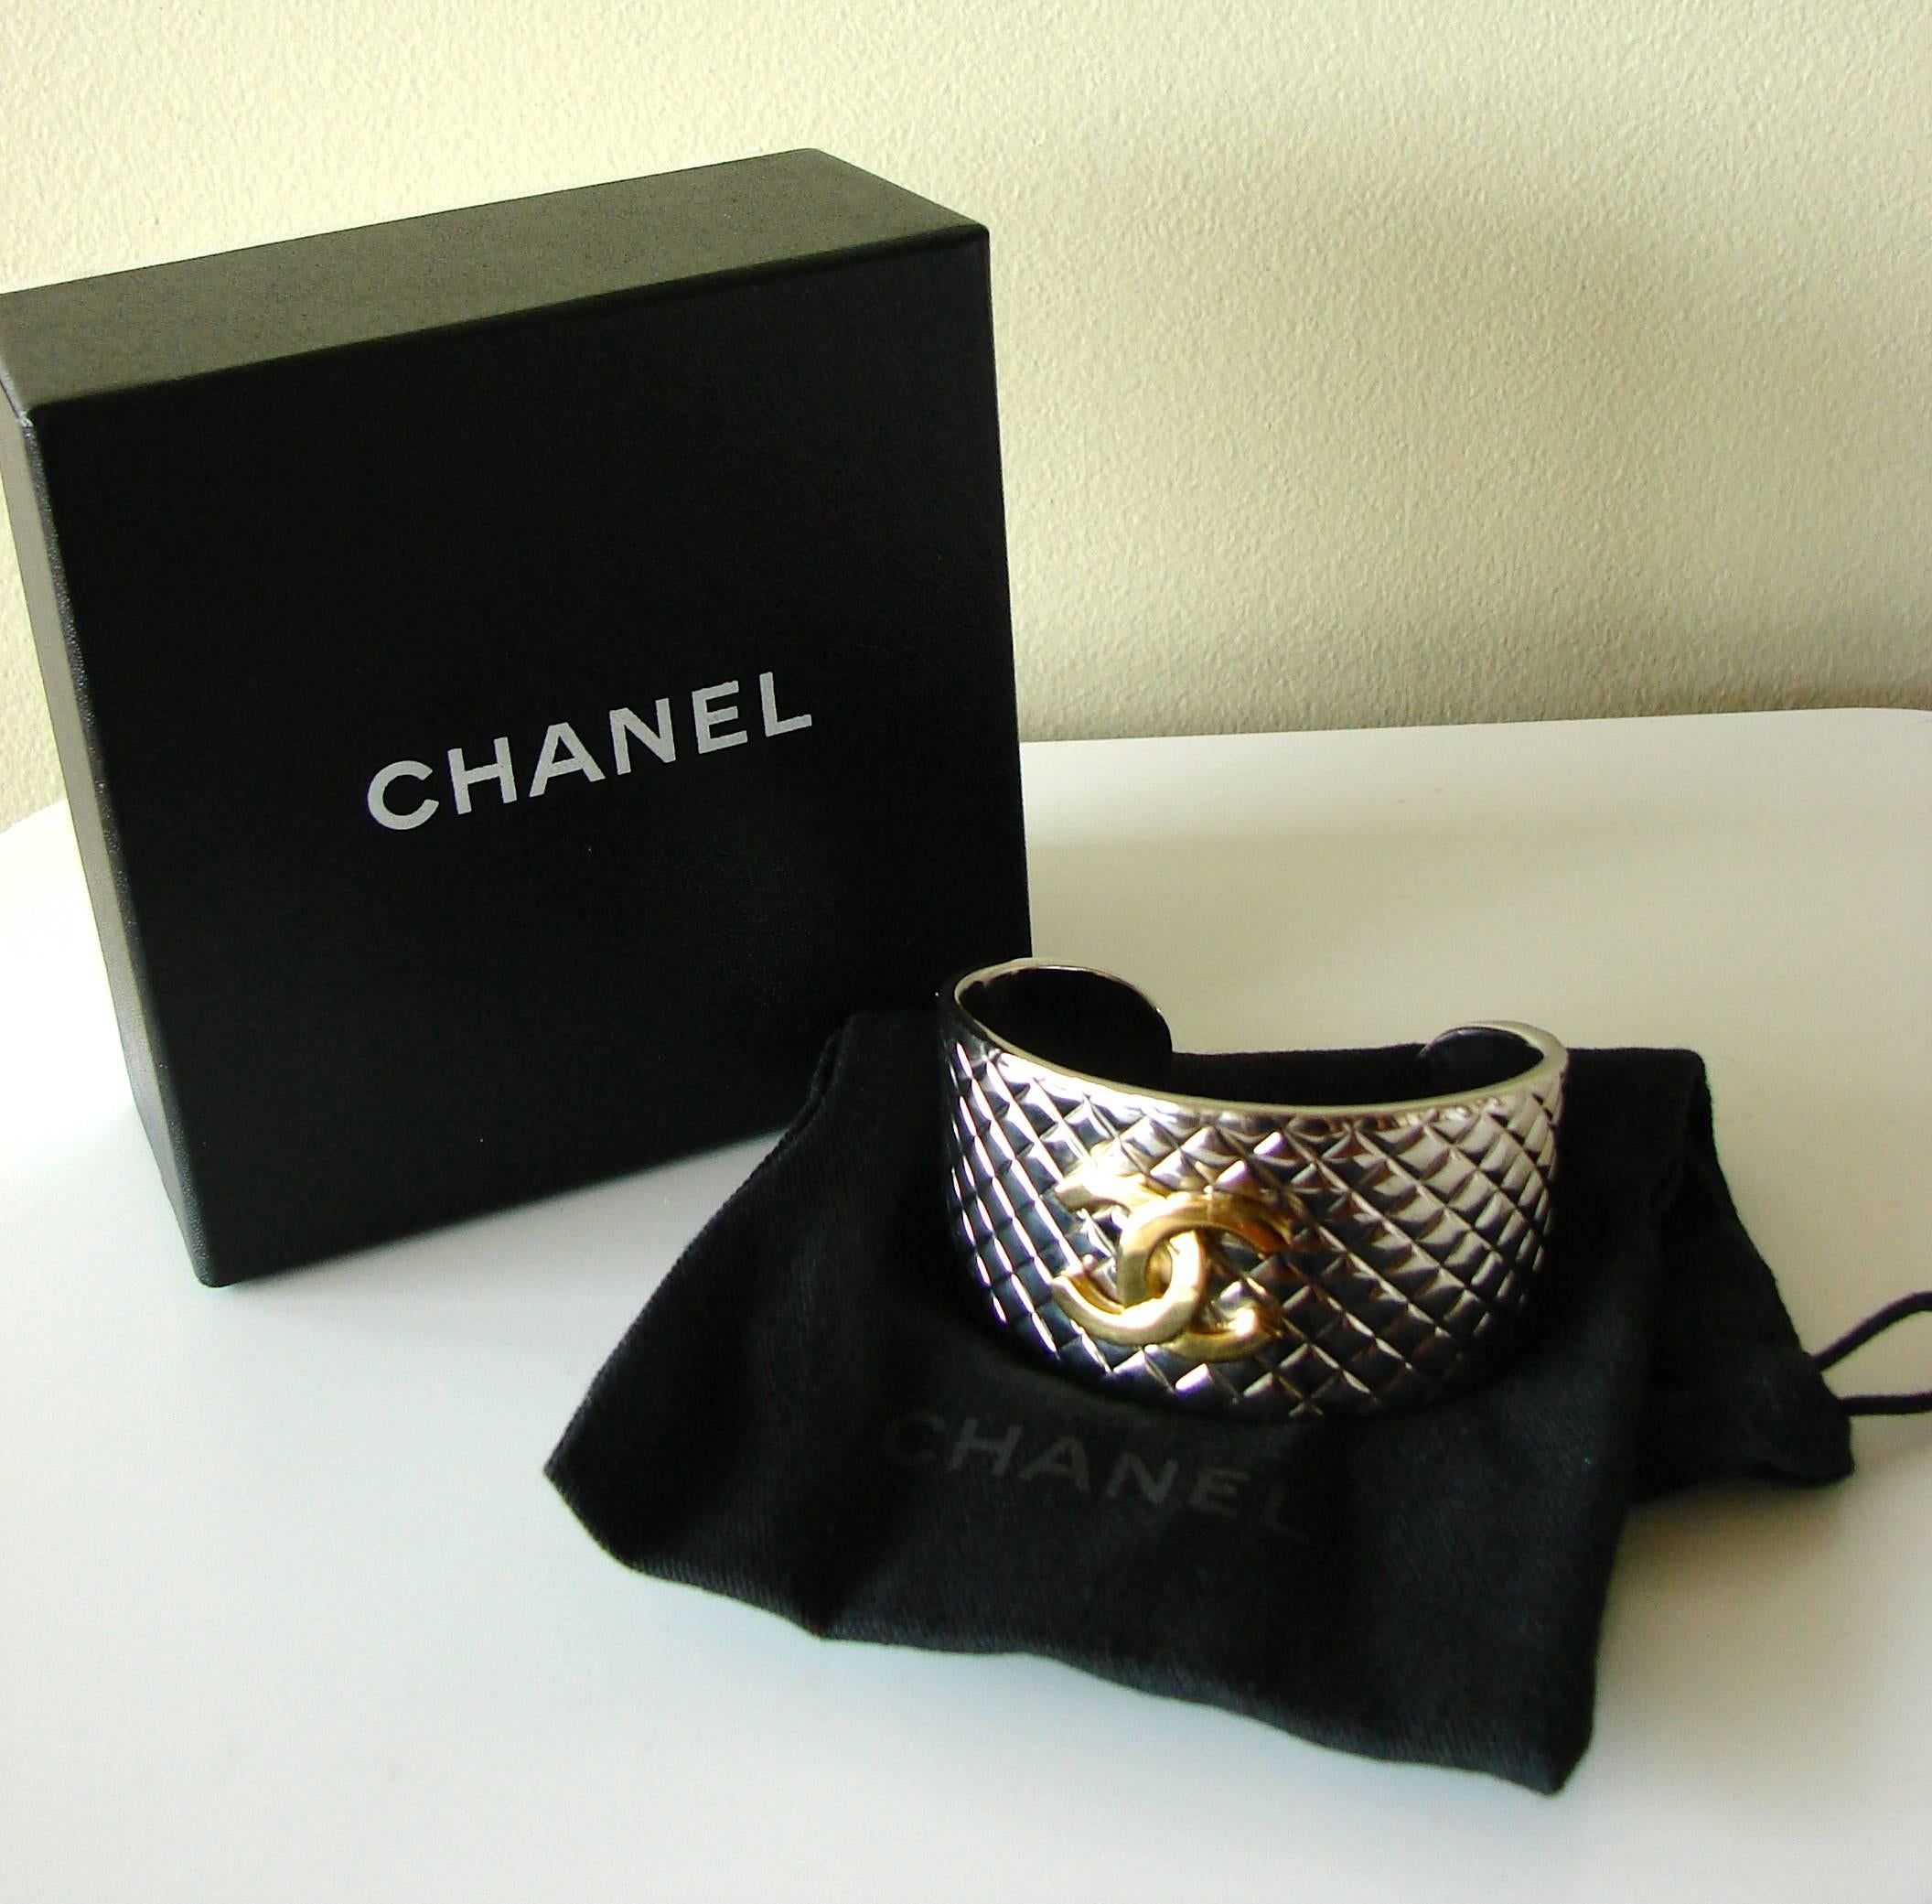 This bracelet was made by Chanel for their 98P collection.  Made from silver metal in Chanel's iconic Matalasse pattern, it features a gold metal CC logo at the center.  In excellent condition, with minor scratching from prior wear, hard to see